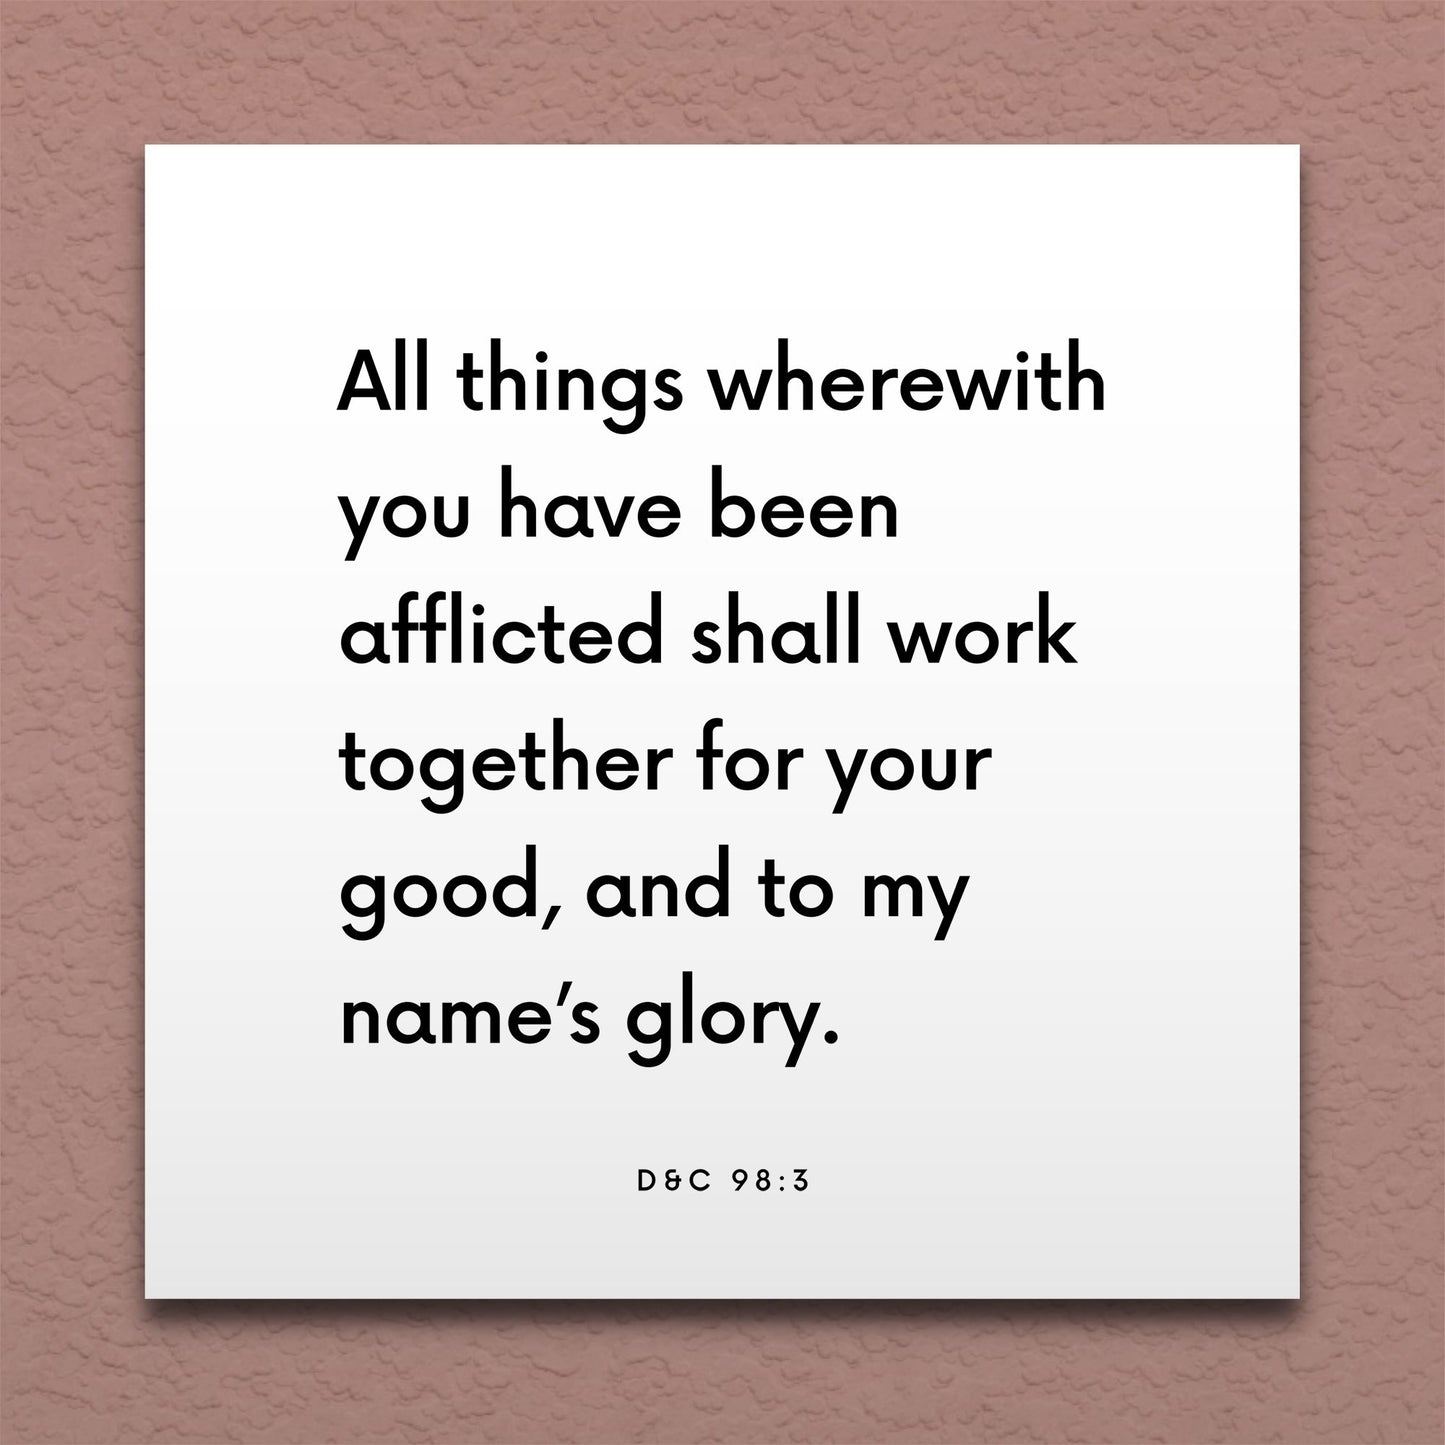 Wall-mounted scripture tile for D&C 98:3 - "All things wherewith you have been afflicted"